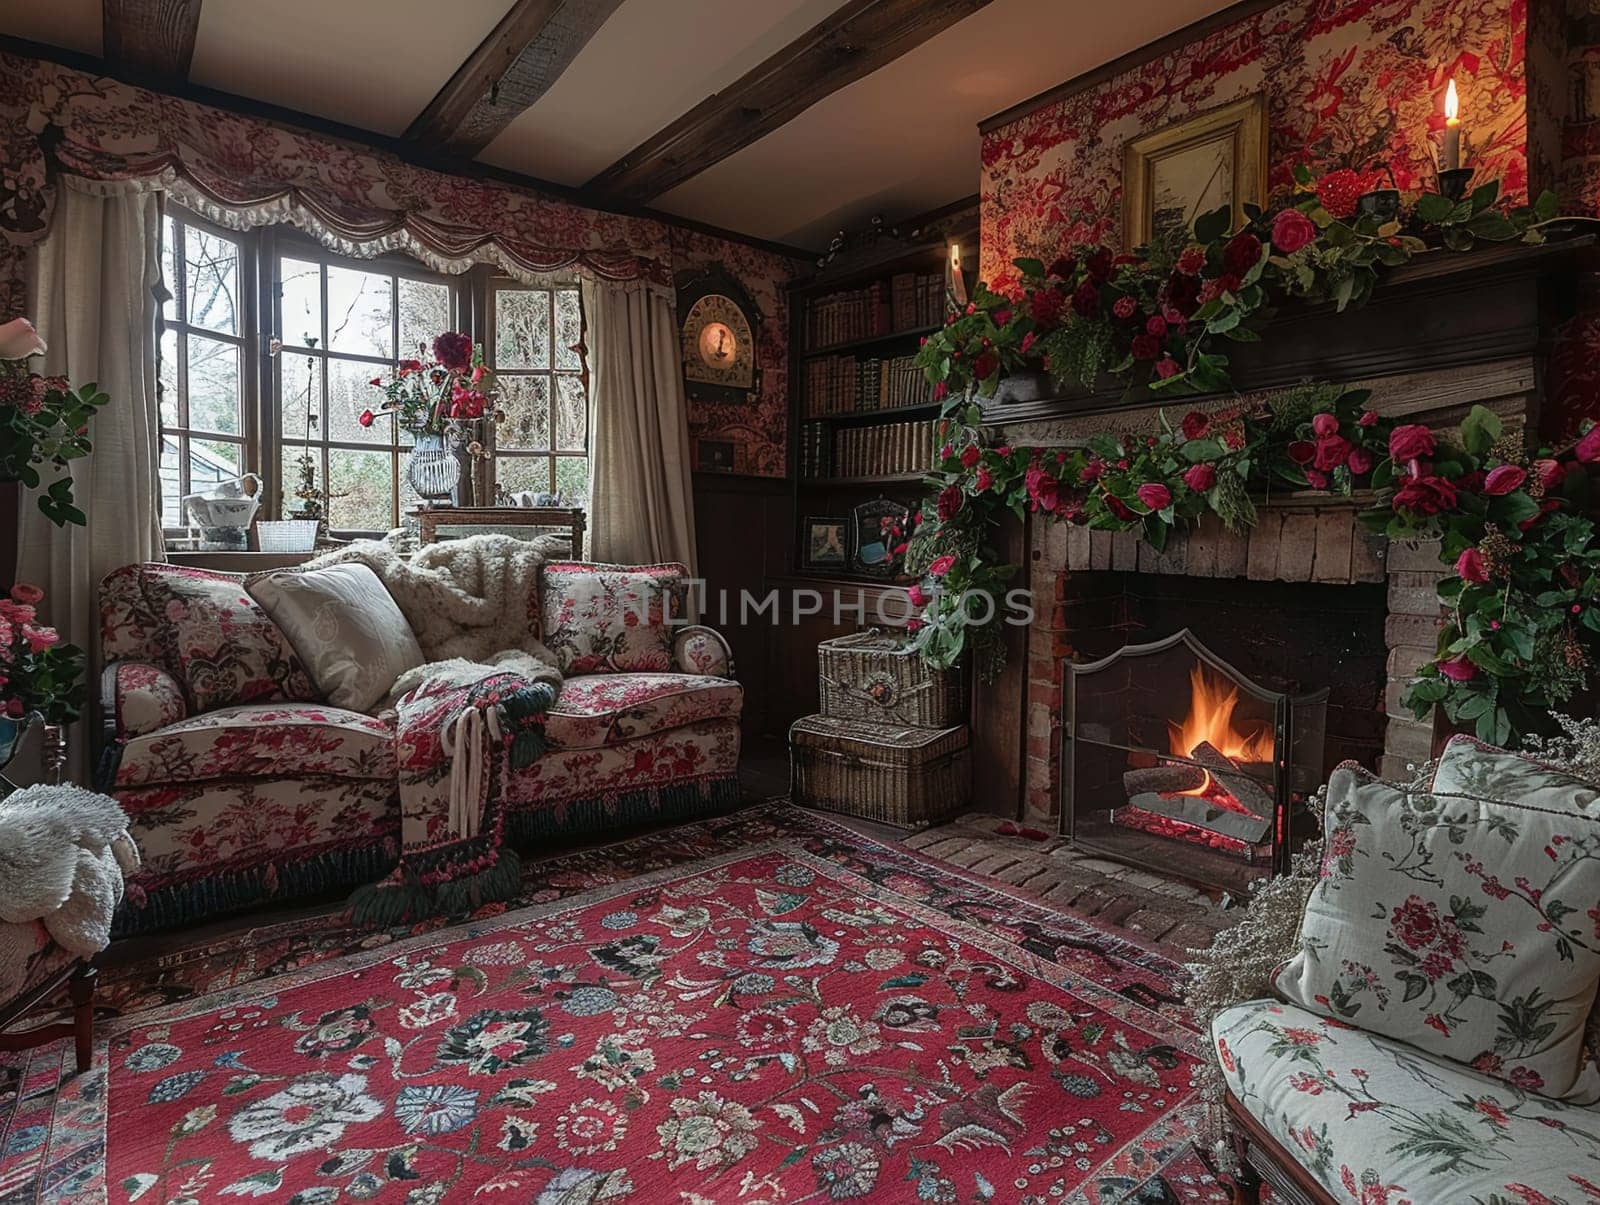 Traditional English cottage living room with floral patterns and cozy fireplace